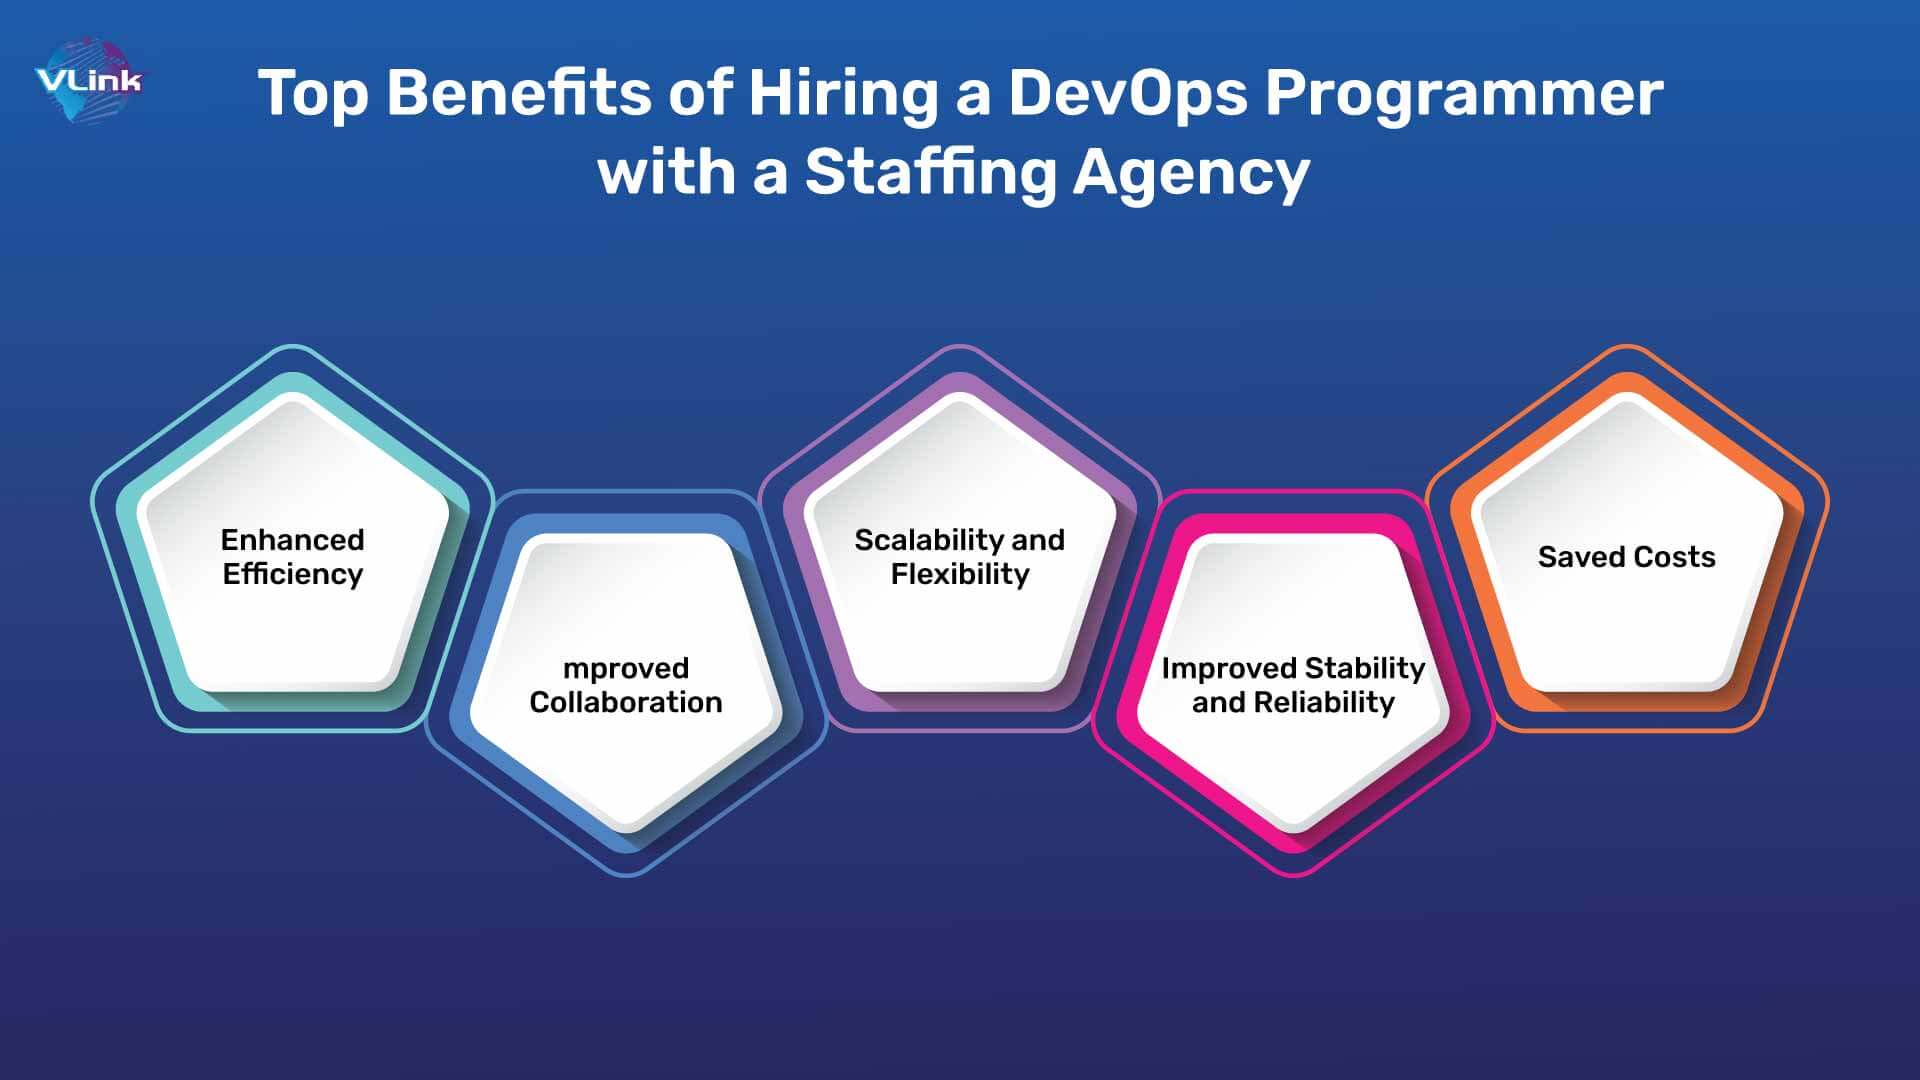 Top Benefits of Hiring a DevOps Programmer with a Staffing Agency